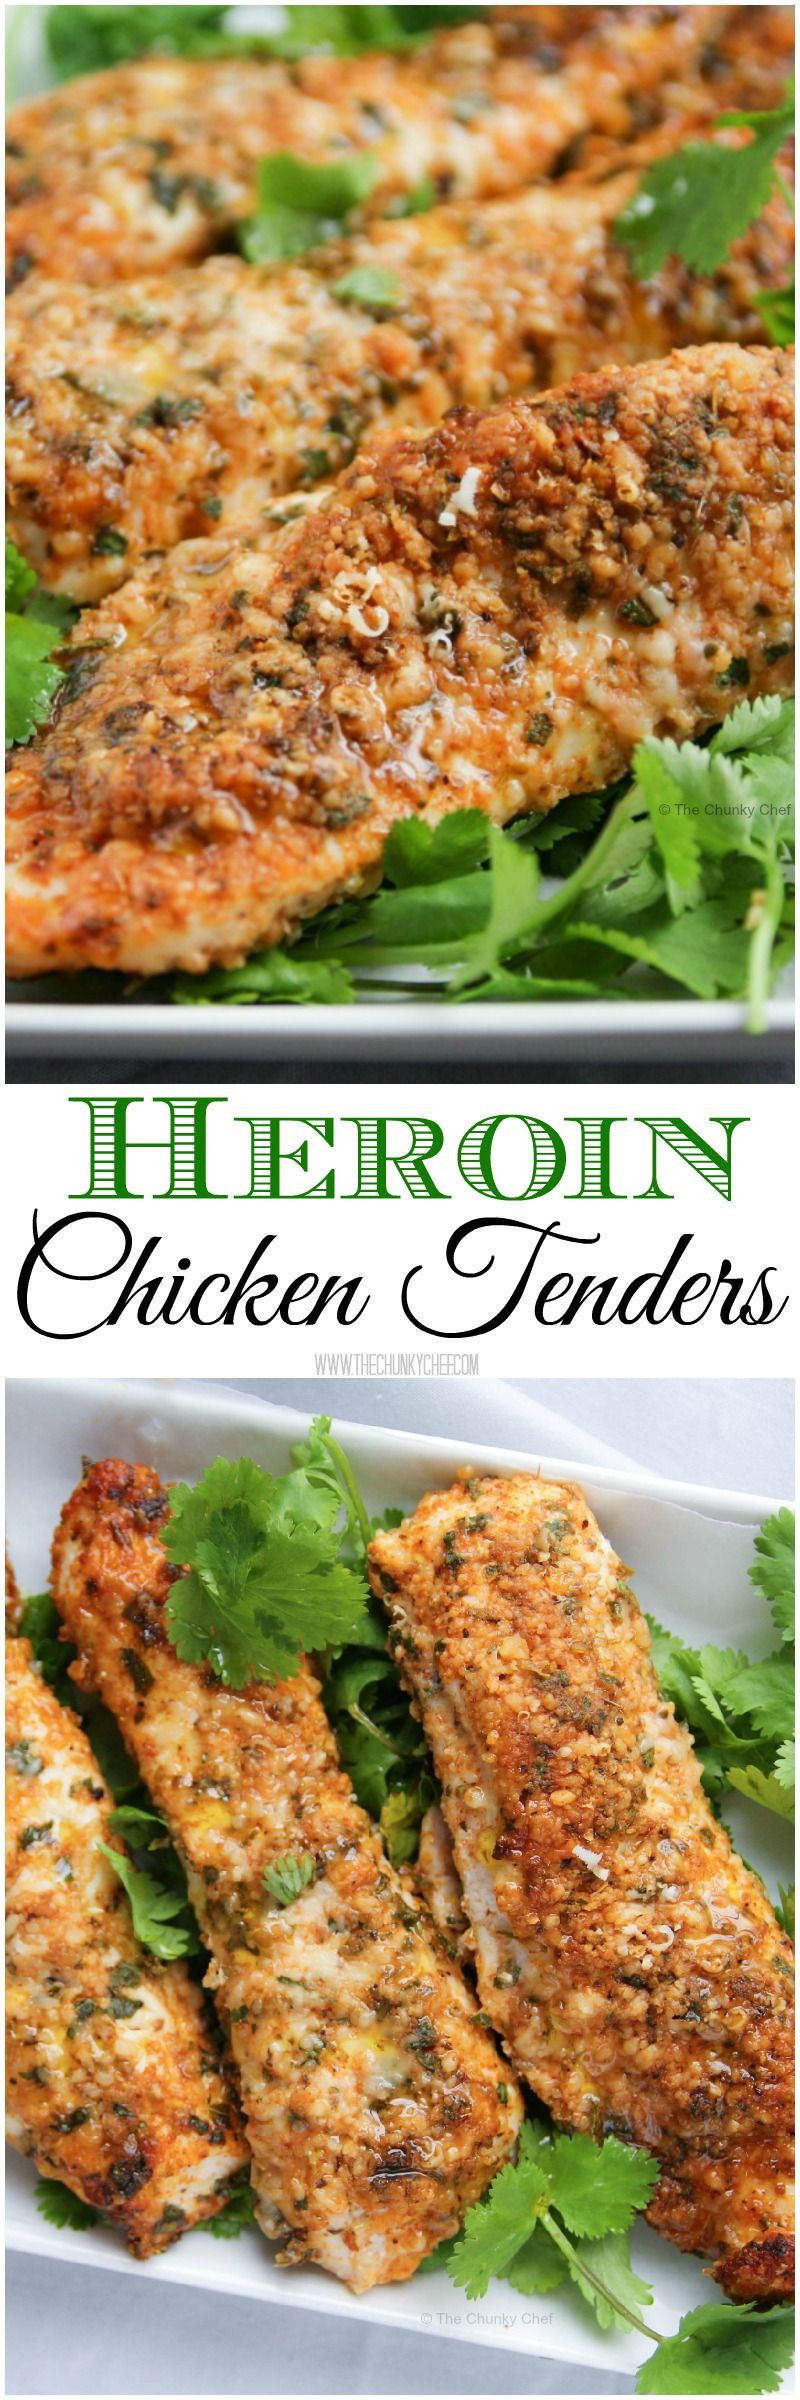 The top 21 Ideas About Baked Chicken Tenderloin Recipes - Home, Family